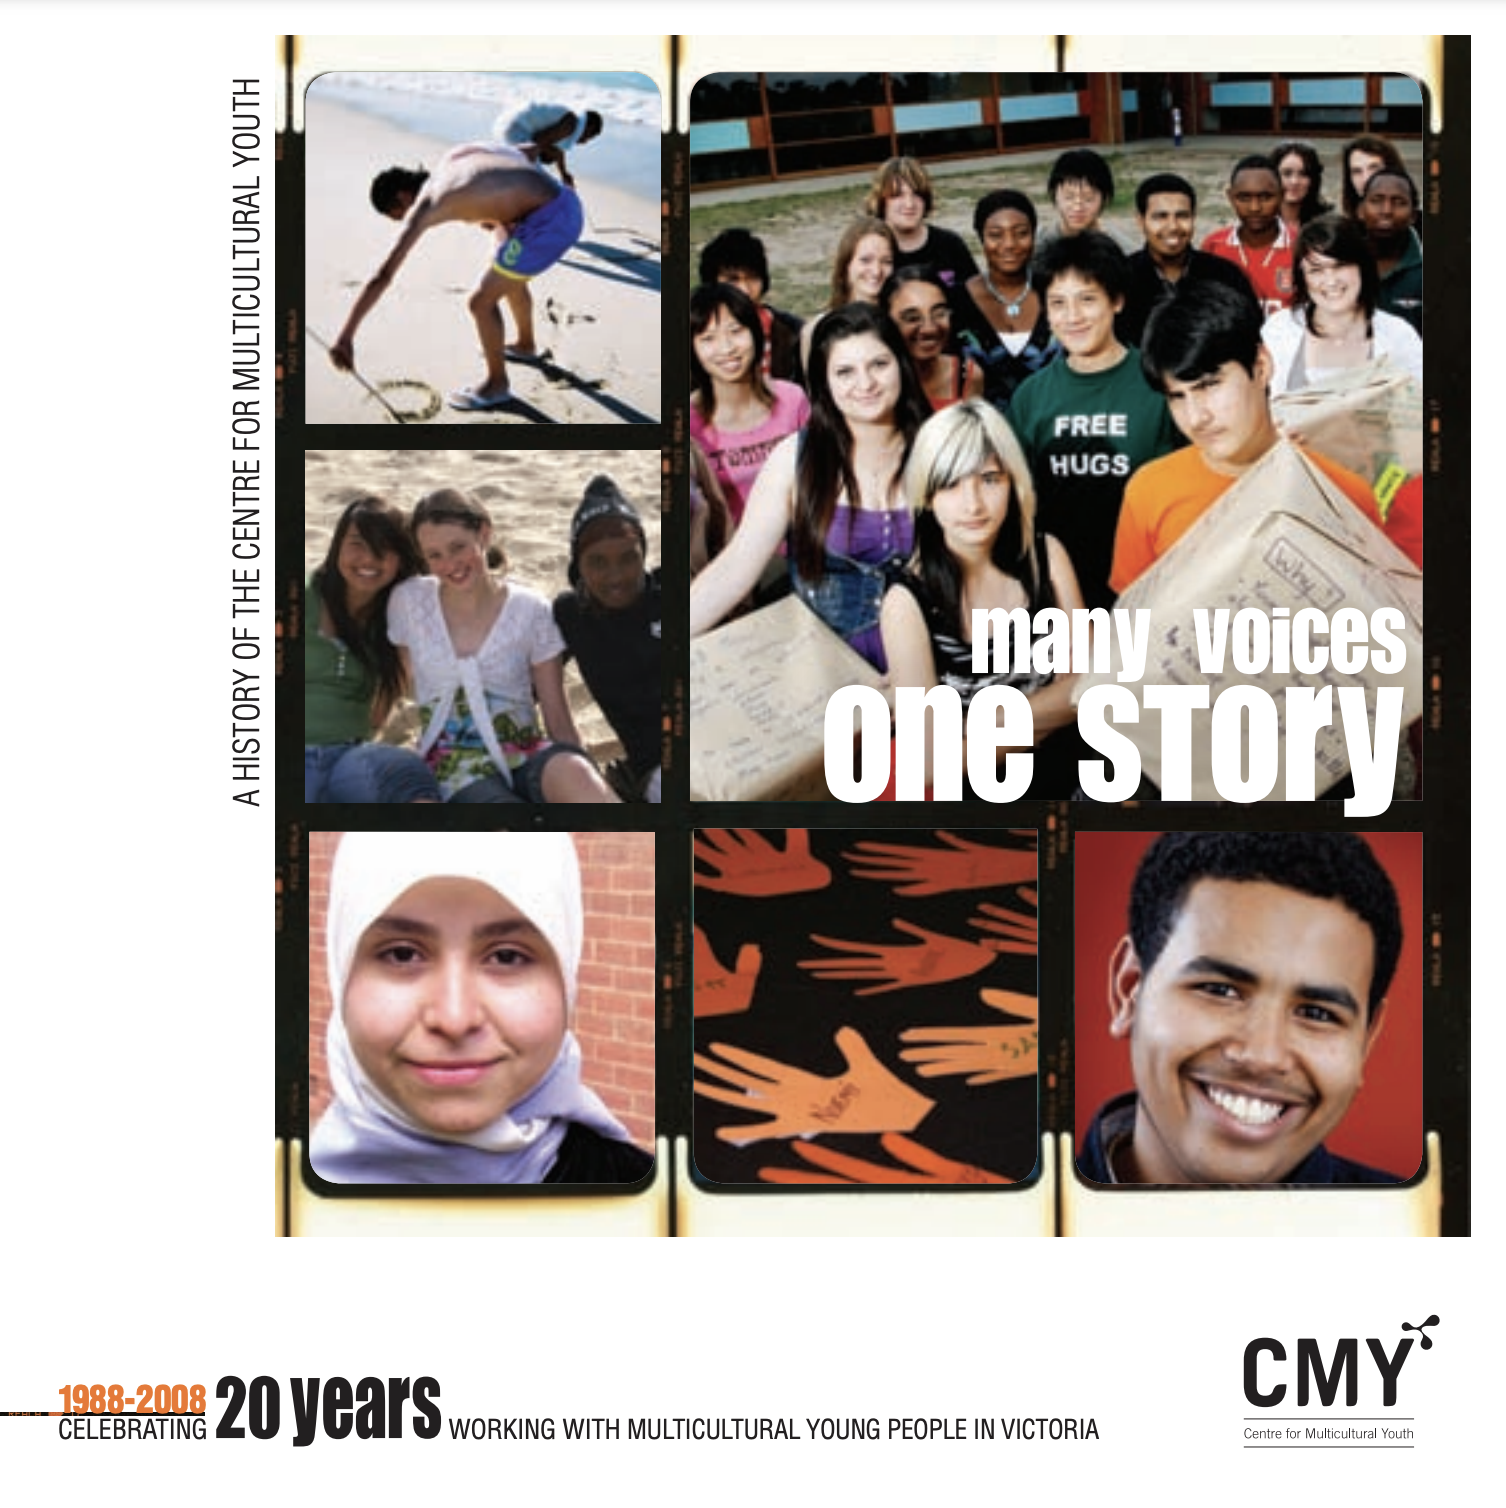 CMY's 'Many Voices One Story